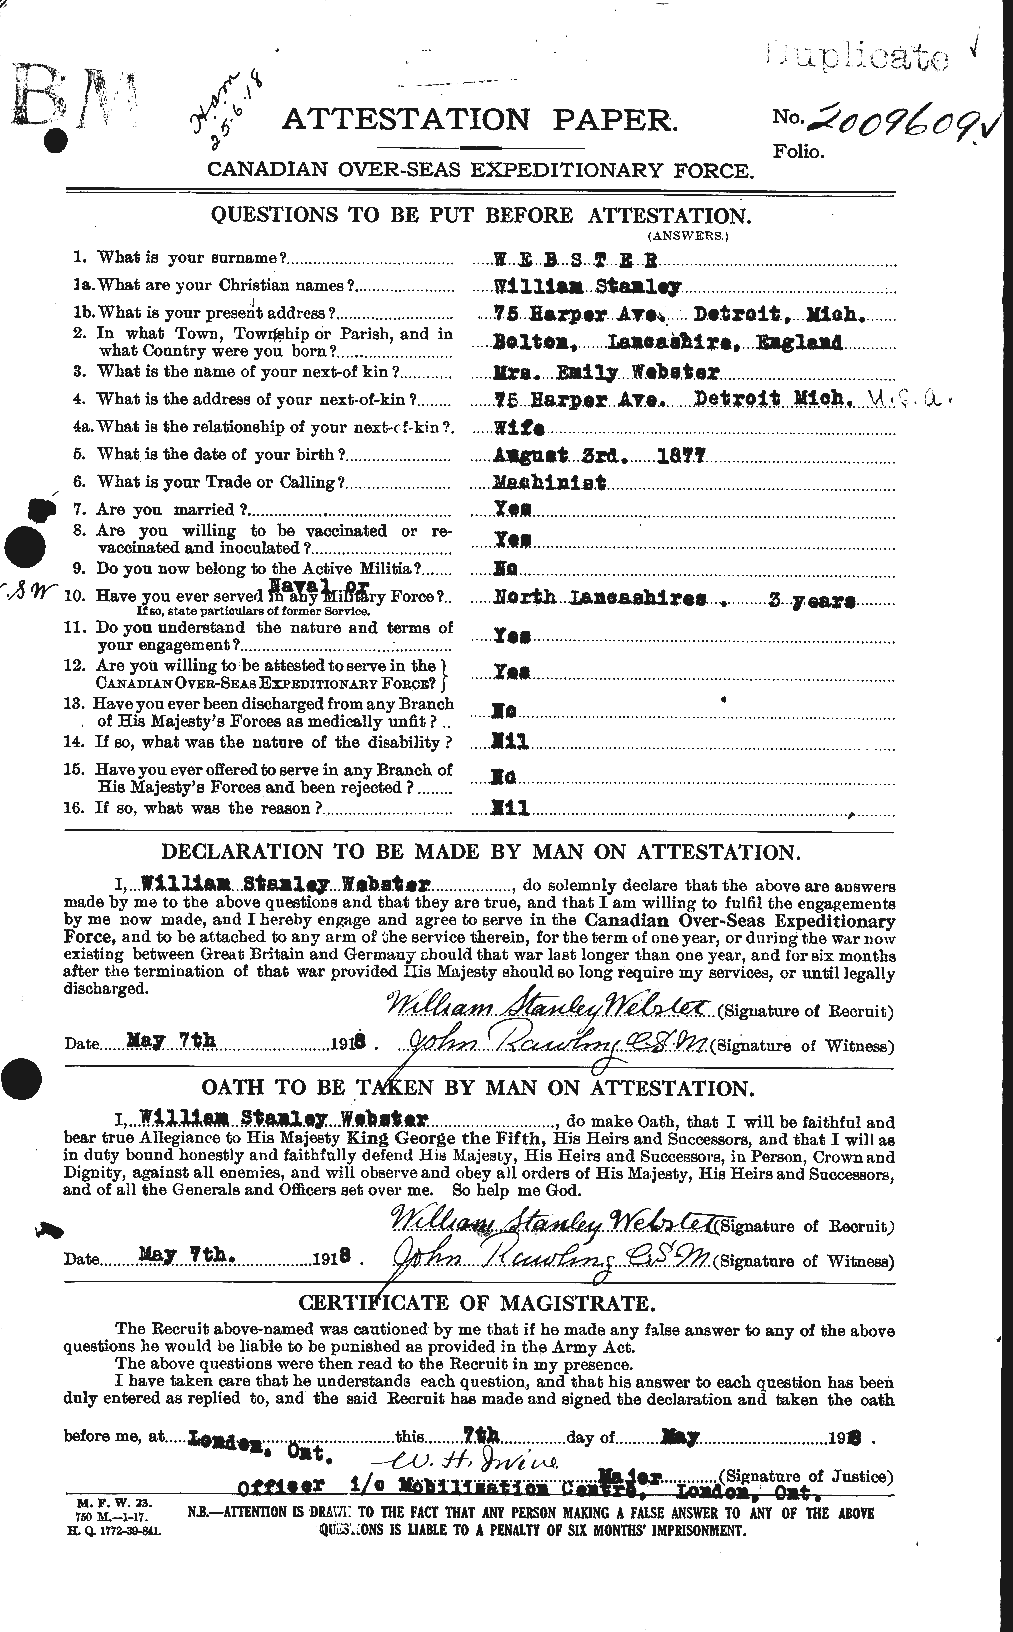 Personnel Records of the First World War - CEF 662037a